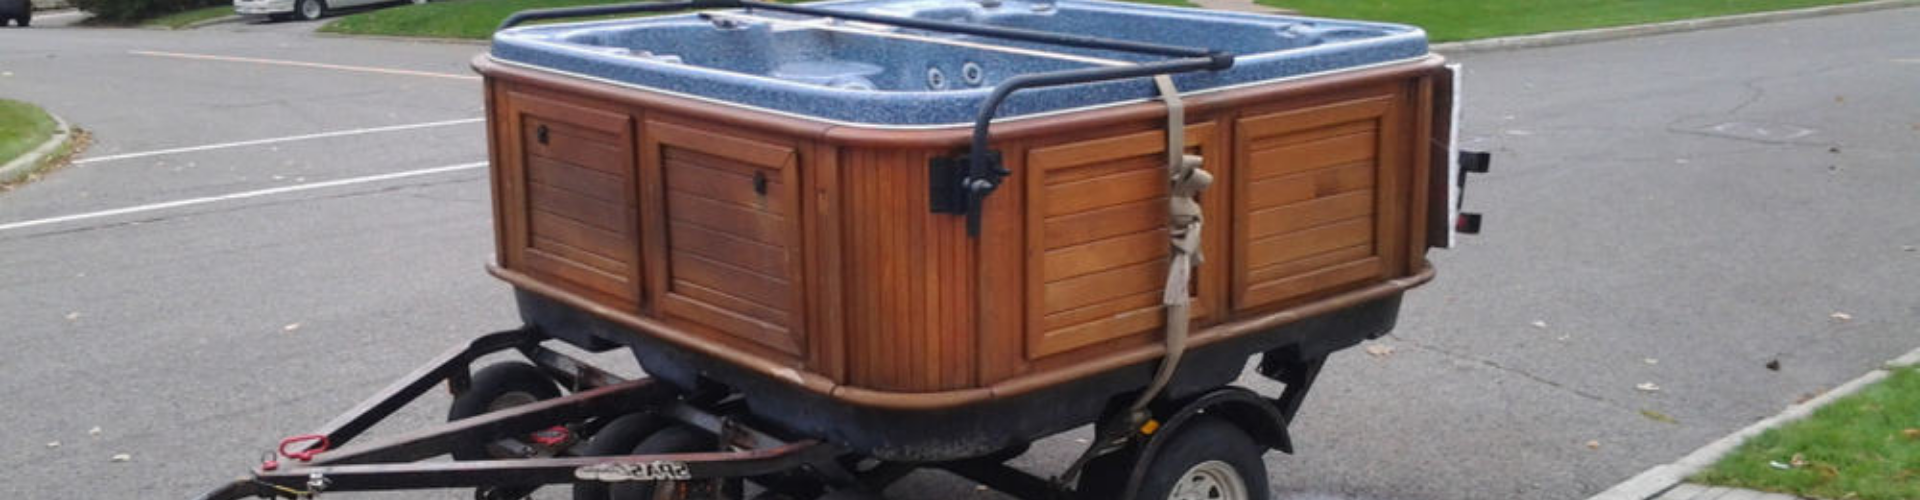 wooden hot tub on a moving trailer